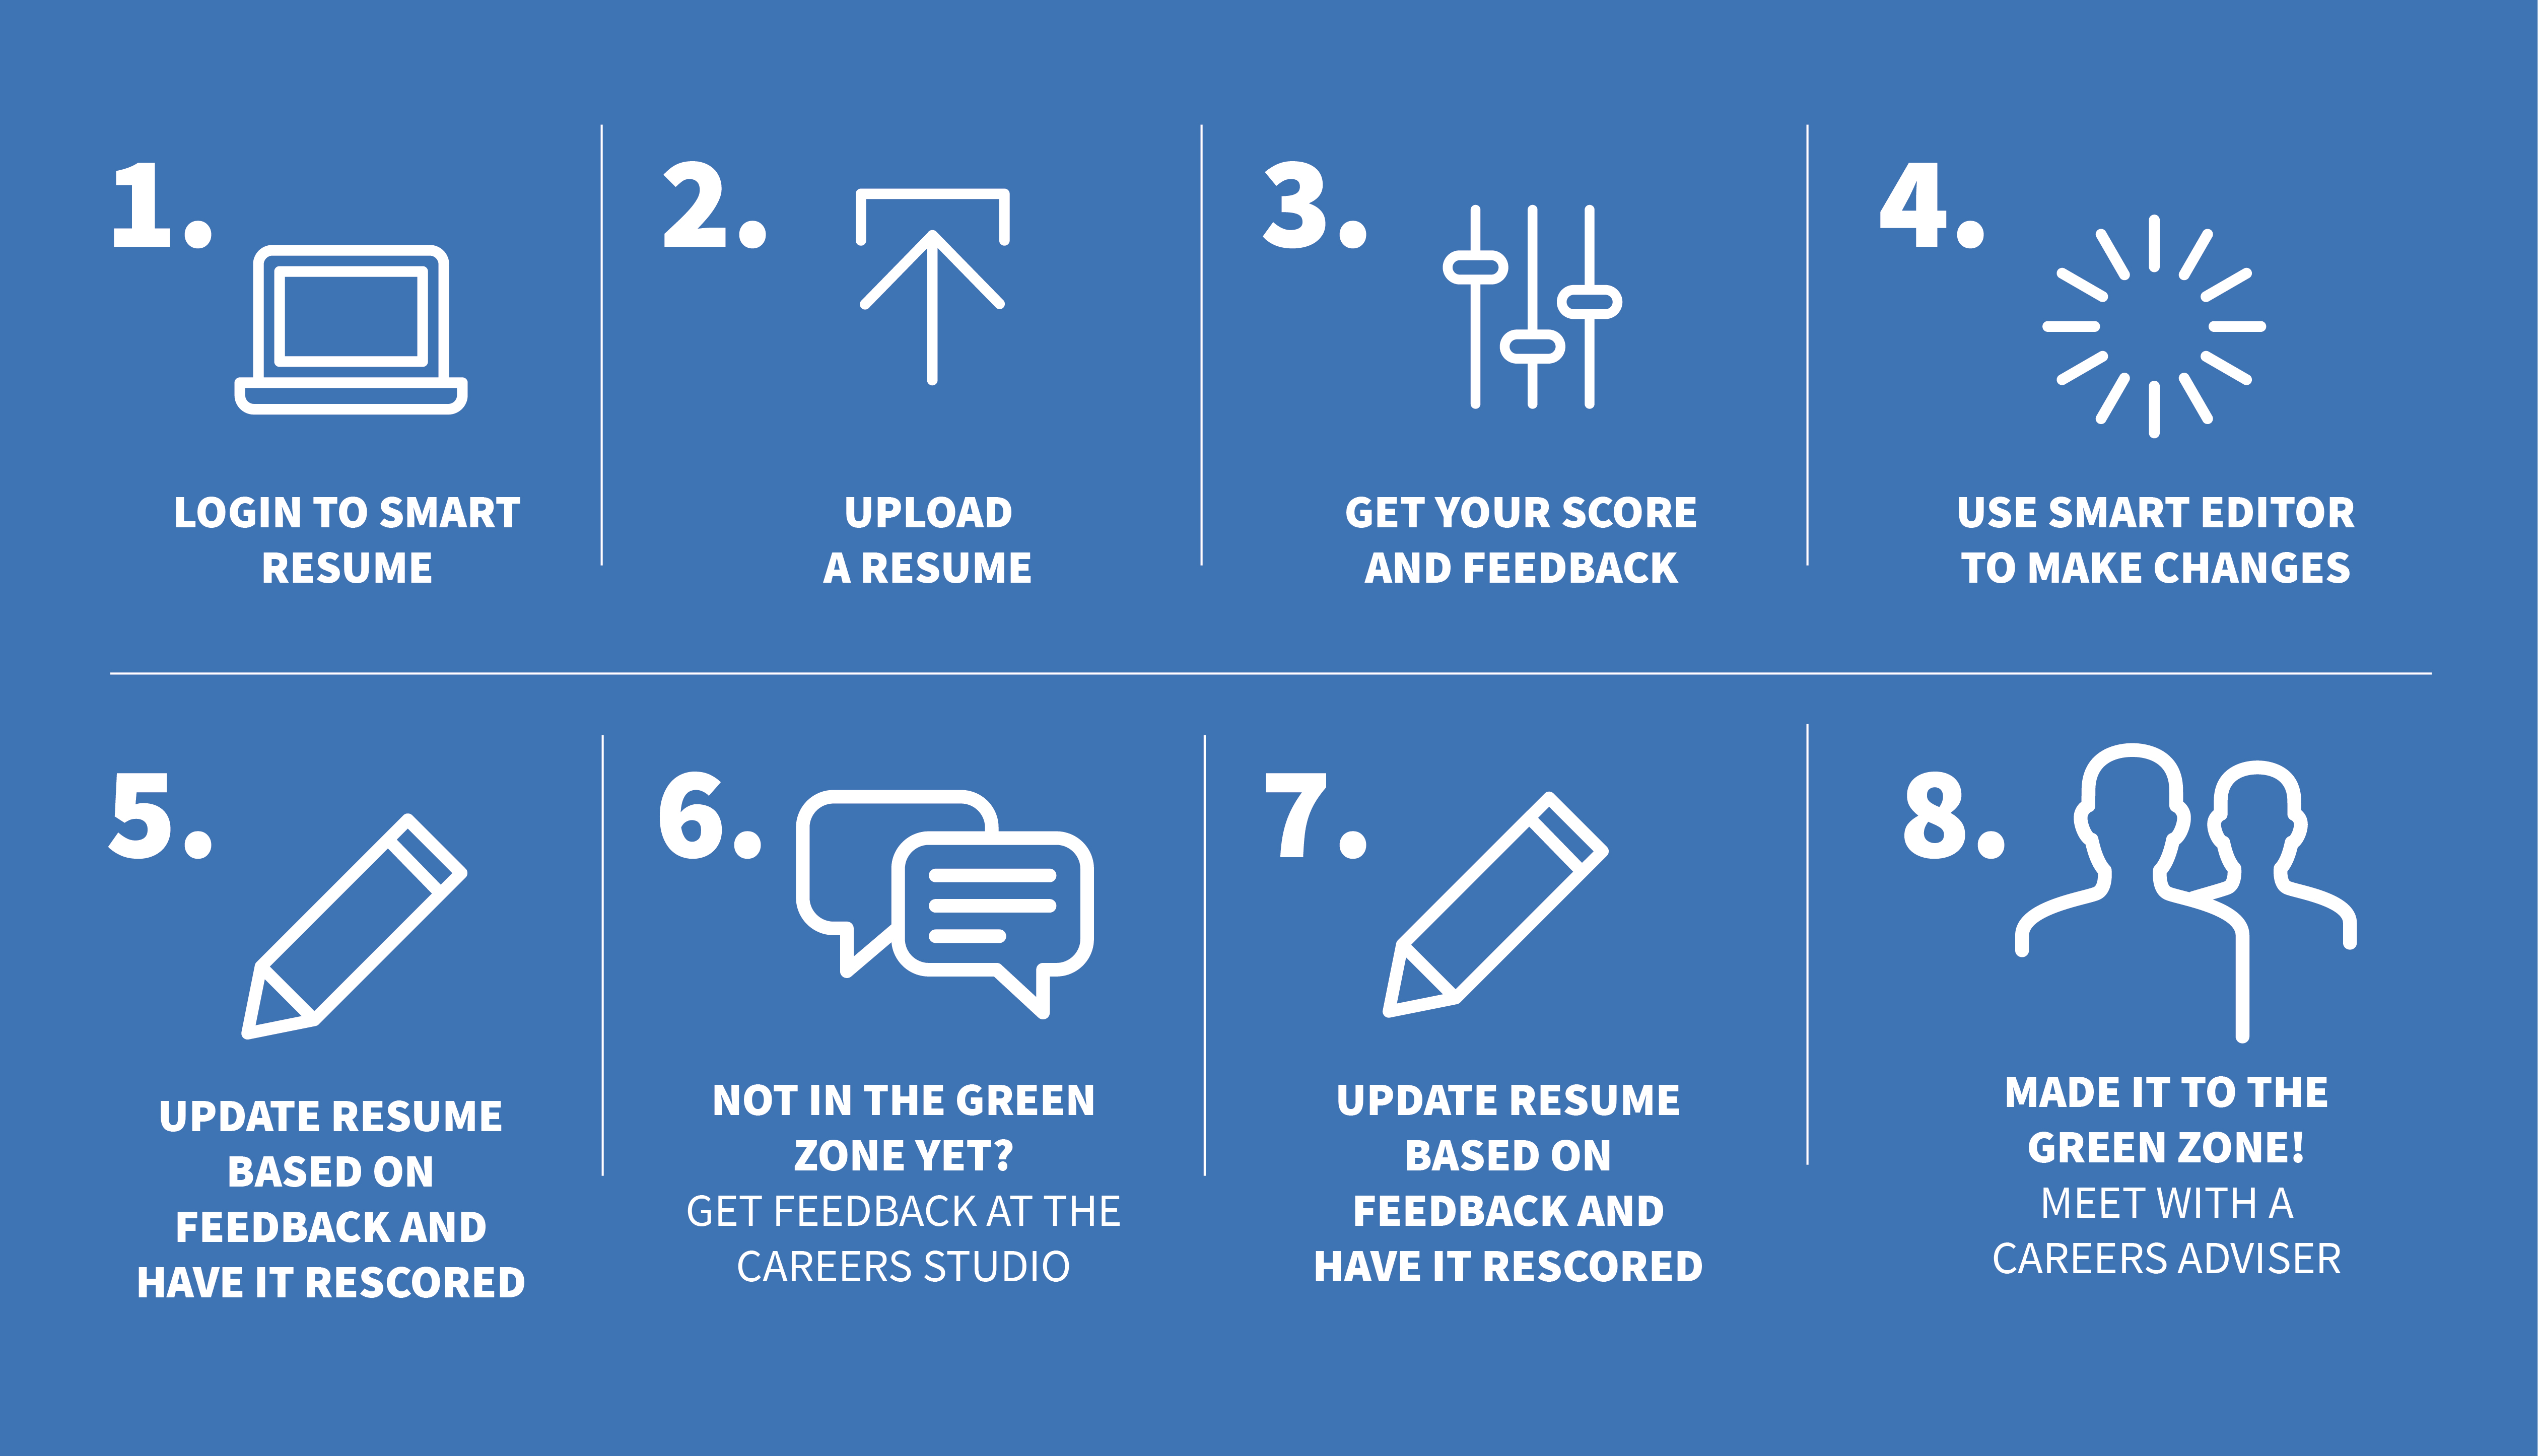 Infographic describing 8 steps. 1 Login to smart resume. 2 Upload resume. 3 Use smart editor to make changes. 4 Update resume based on feedback and have it rescored. 6 Not in the green zone yet? Get feedback at the careers studio. 7 Update resume based on feedback and have it rescored. 8 Made it to the green zone! Meet with a careers adviser.